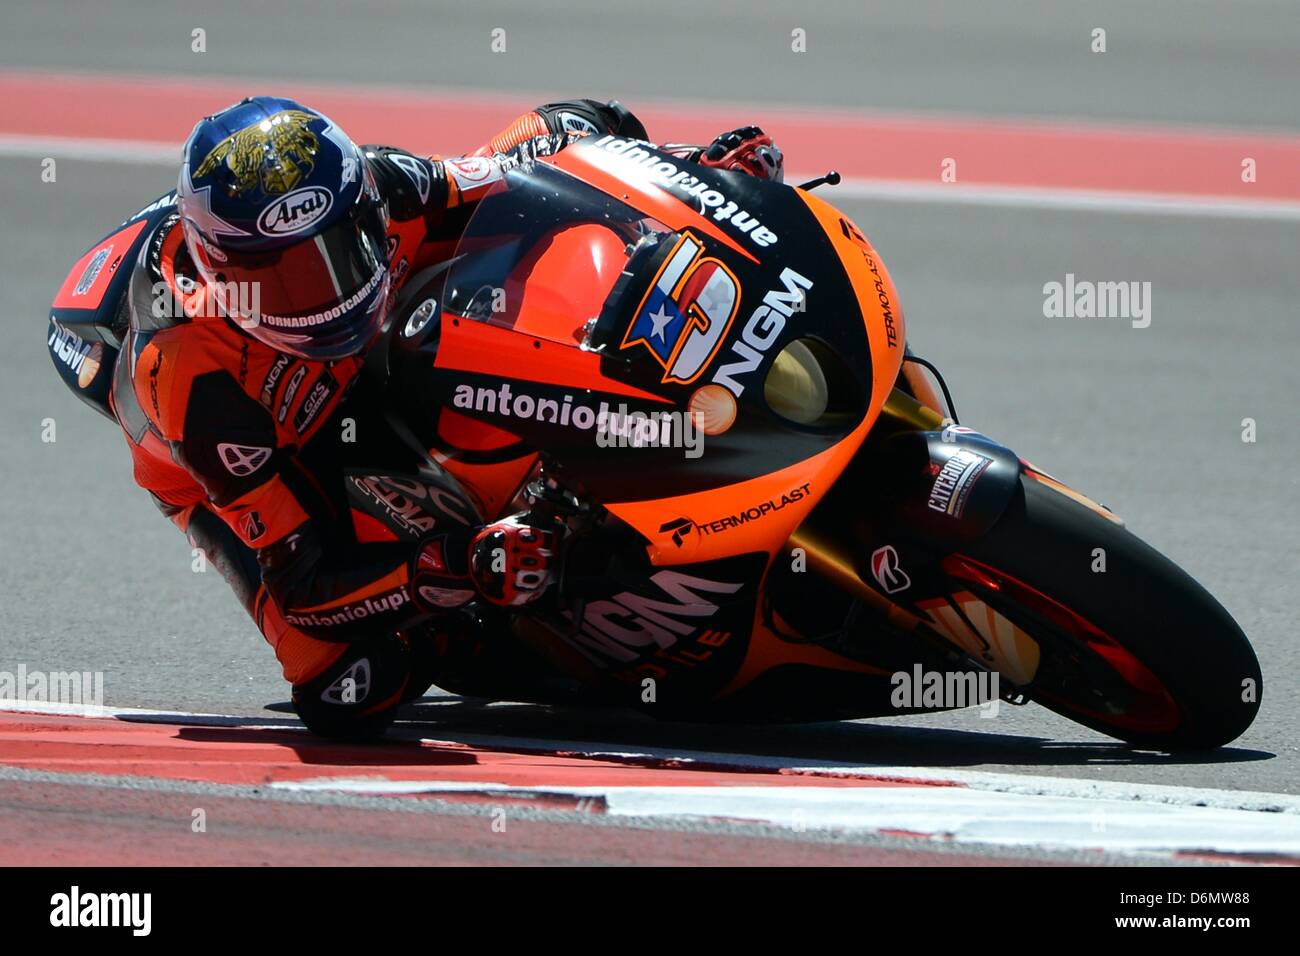 April 20, 2013. Colin Edwards #5 of NGM Foward Mobile Racing in action ...